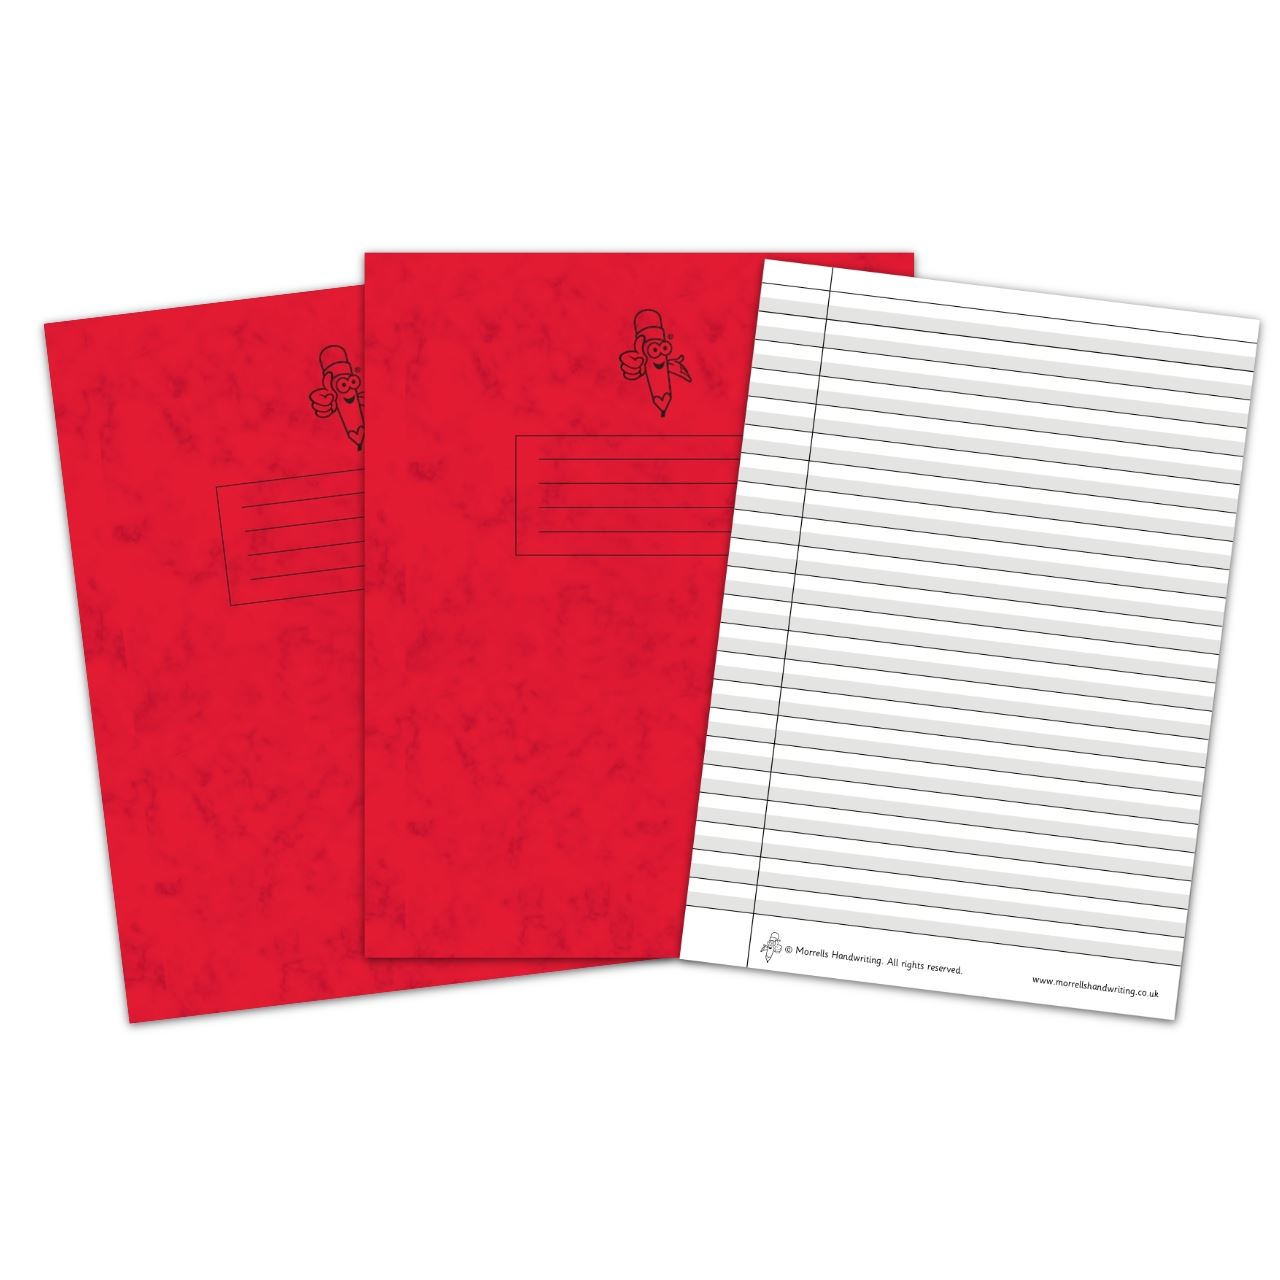 Handwriting Exercise Book Bundle – Red Narrow Lined 2 books